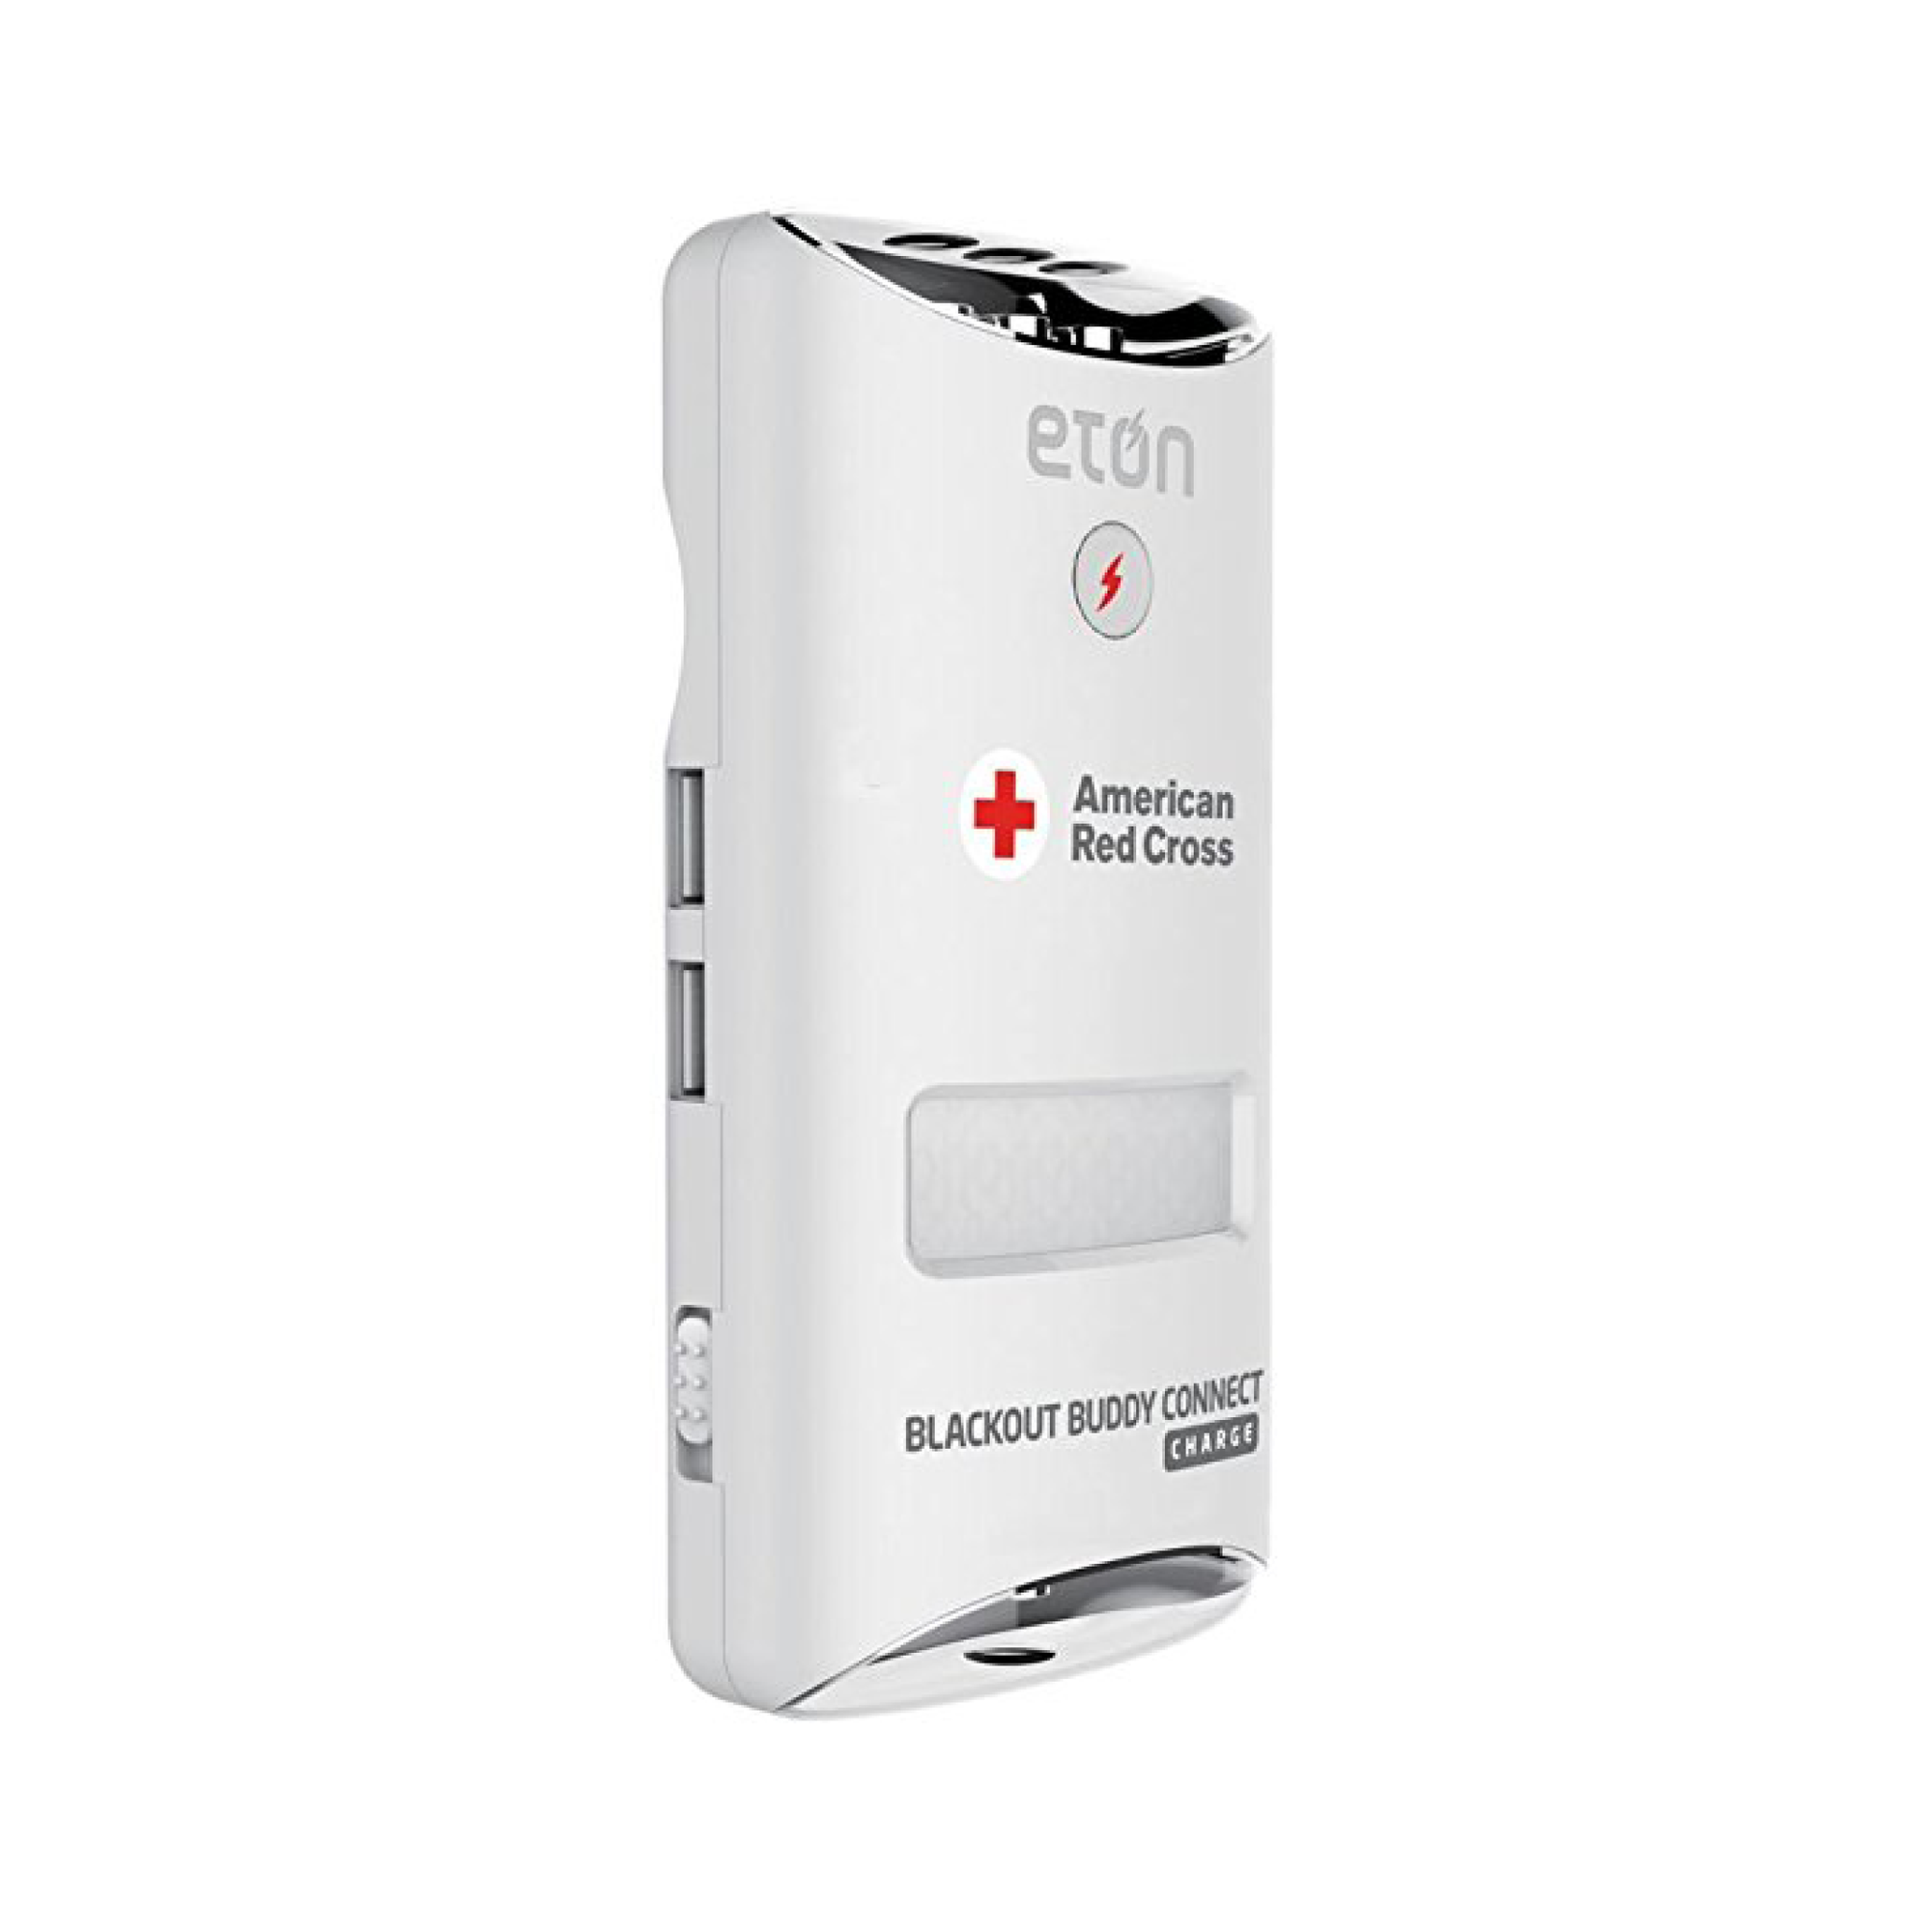 American Red Cross Blackout Buddy Connect Charge - Etón - Etón E-Commerce